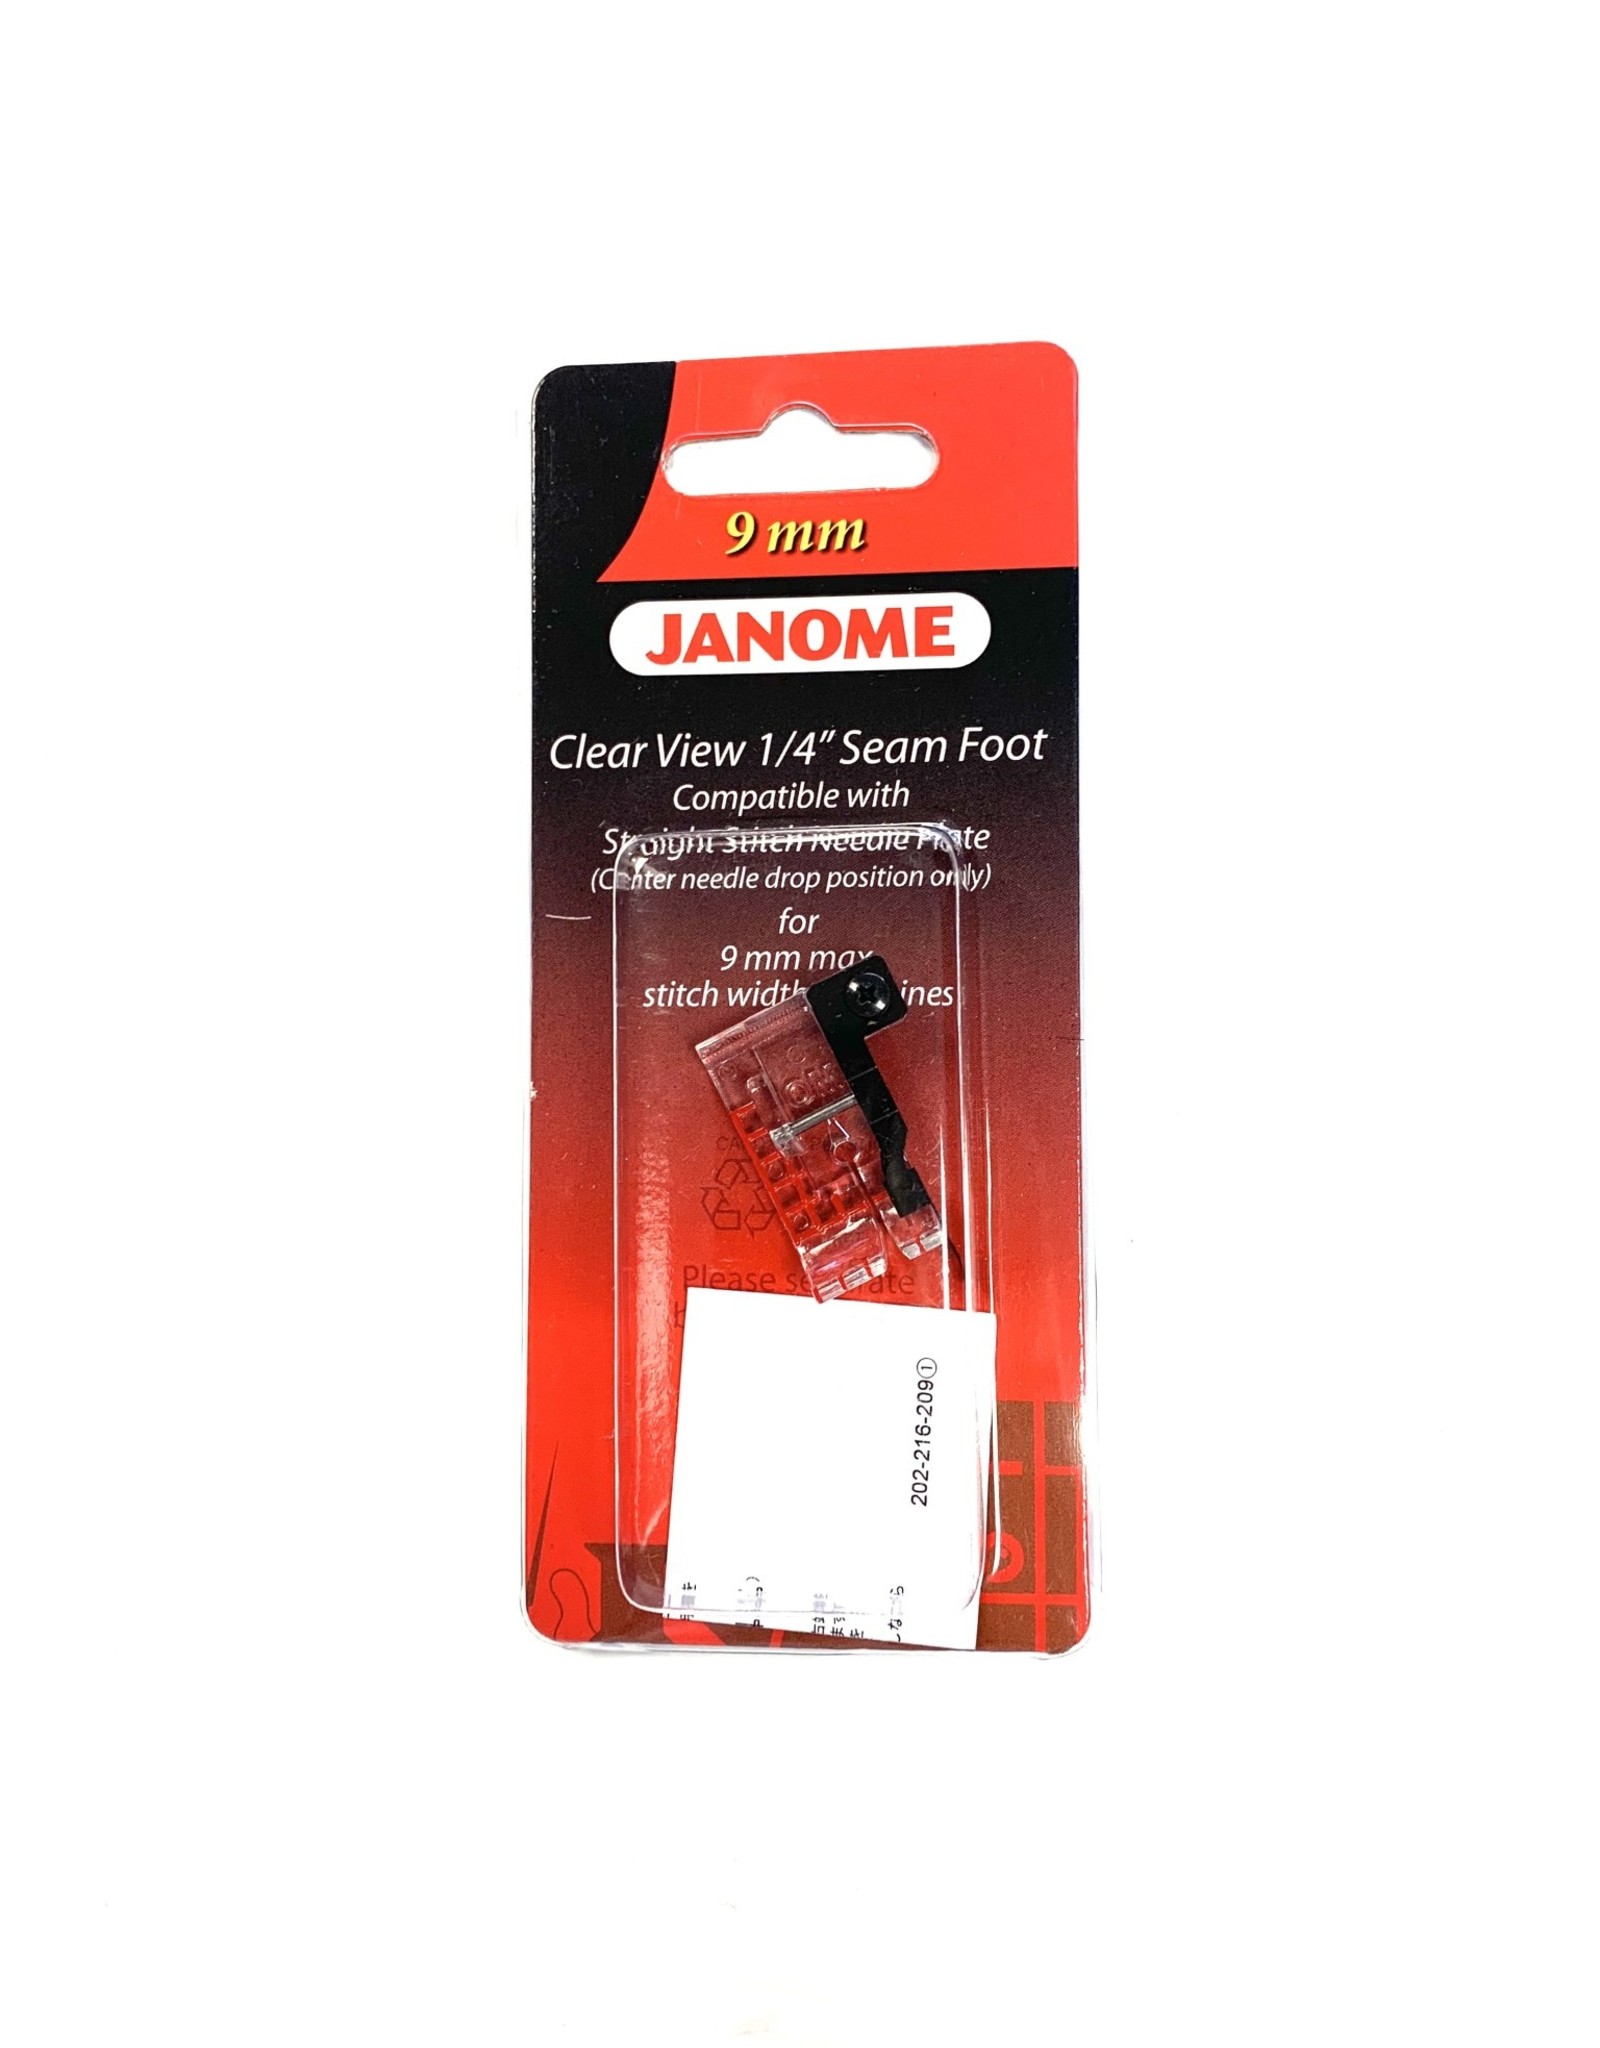 Janome 9mm Clear View 1/4" Seam Foot- 202216003